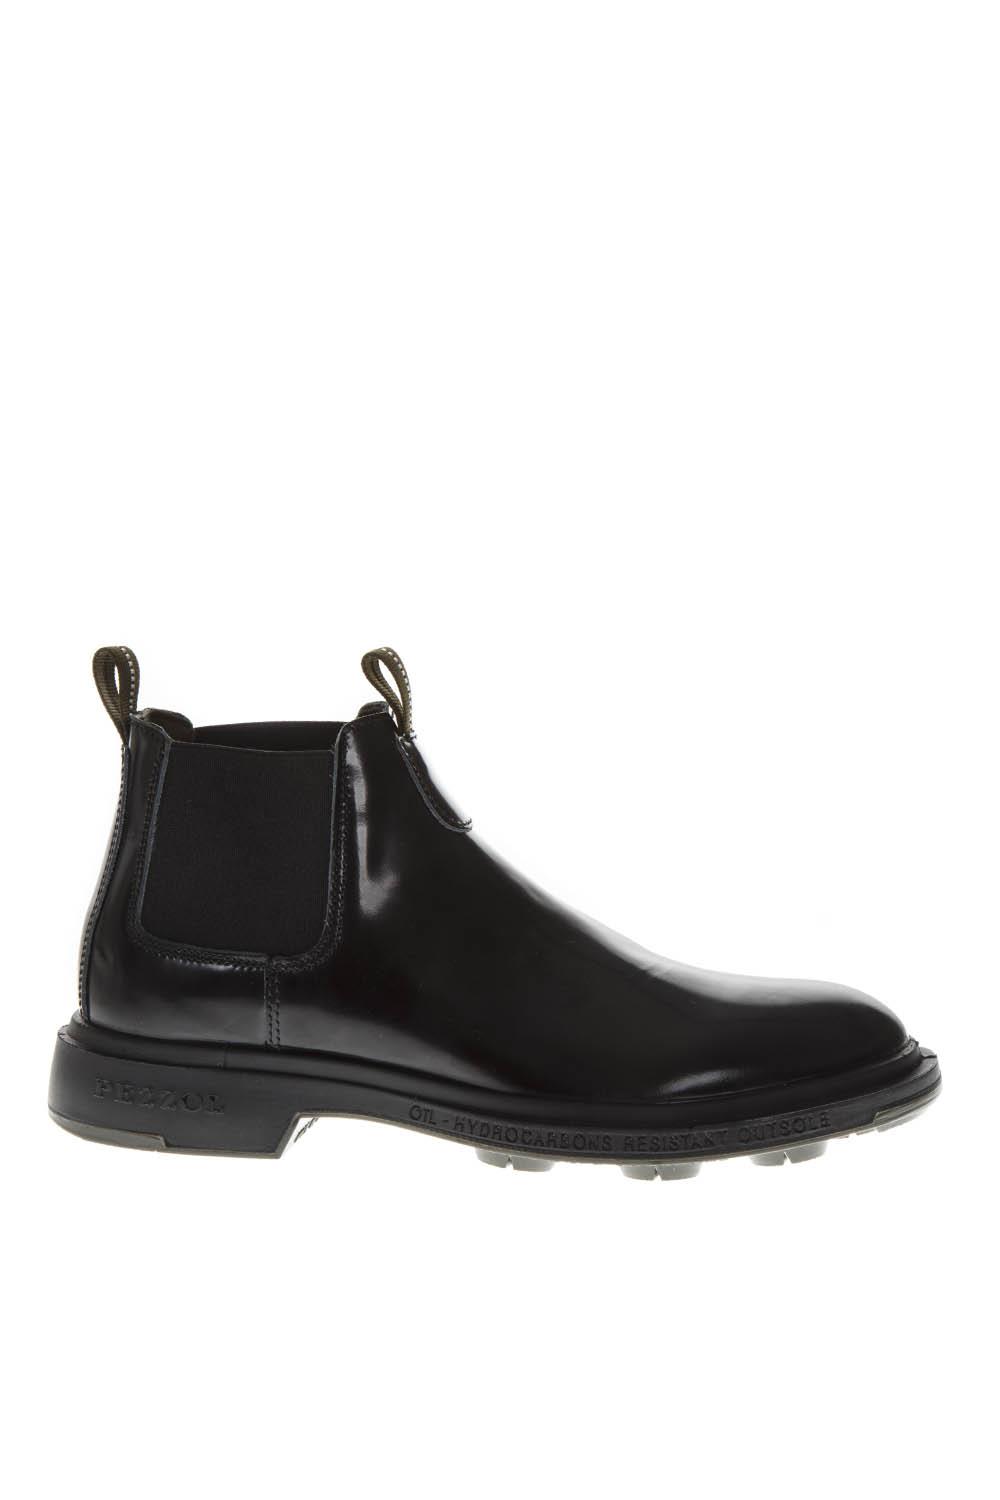 Pezzol 1951 Black Leather Boots